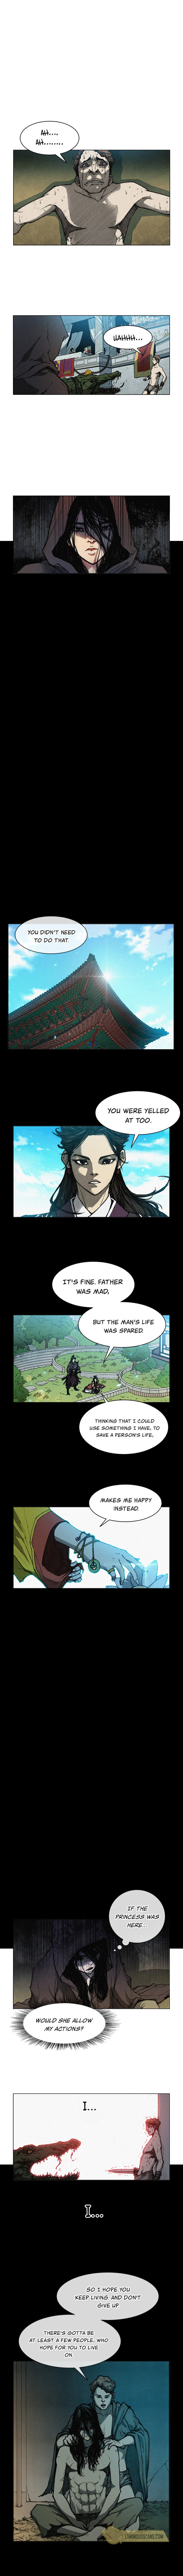 The Long Way Of The Warrior - Chapter 5 Page 10